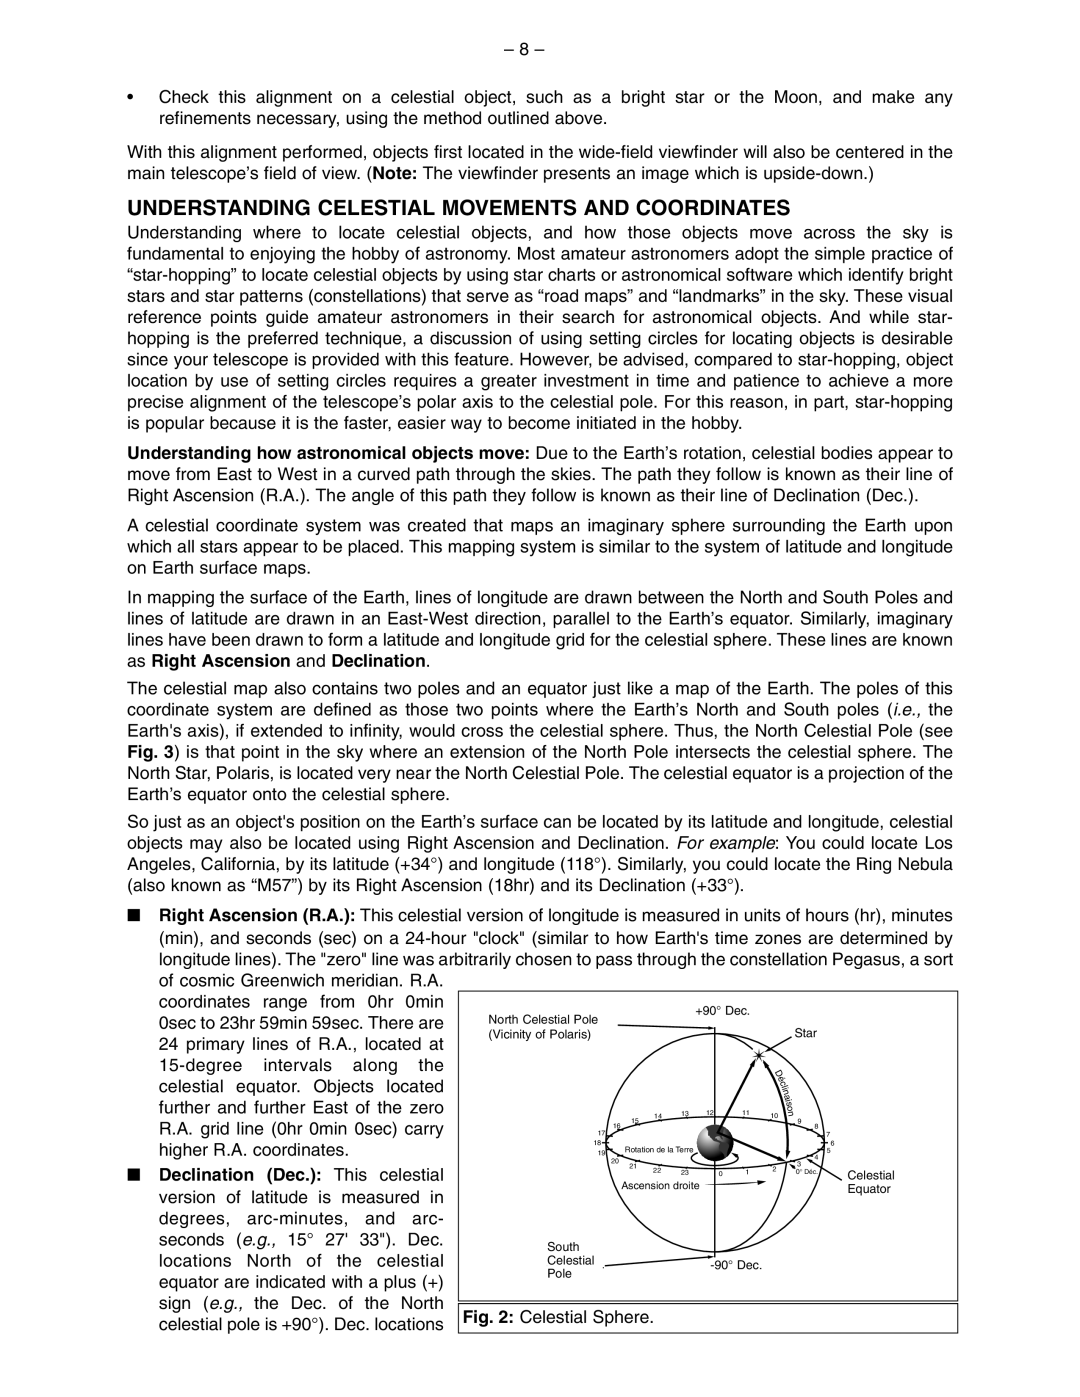 Meade 114 EQ-ASB instruction manual Understanding Celestial Movements And Coordinates, Declination, Dec.: This, e.g 